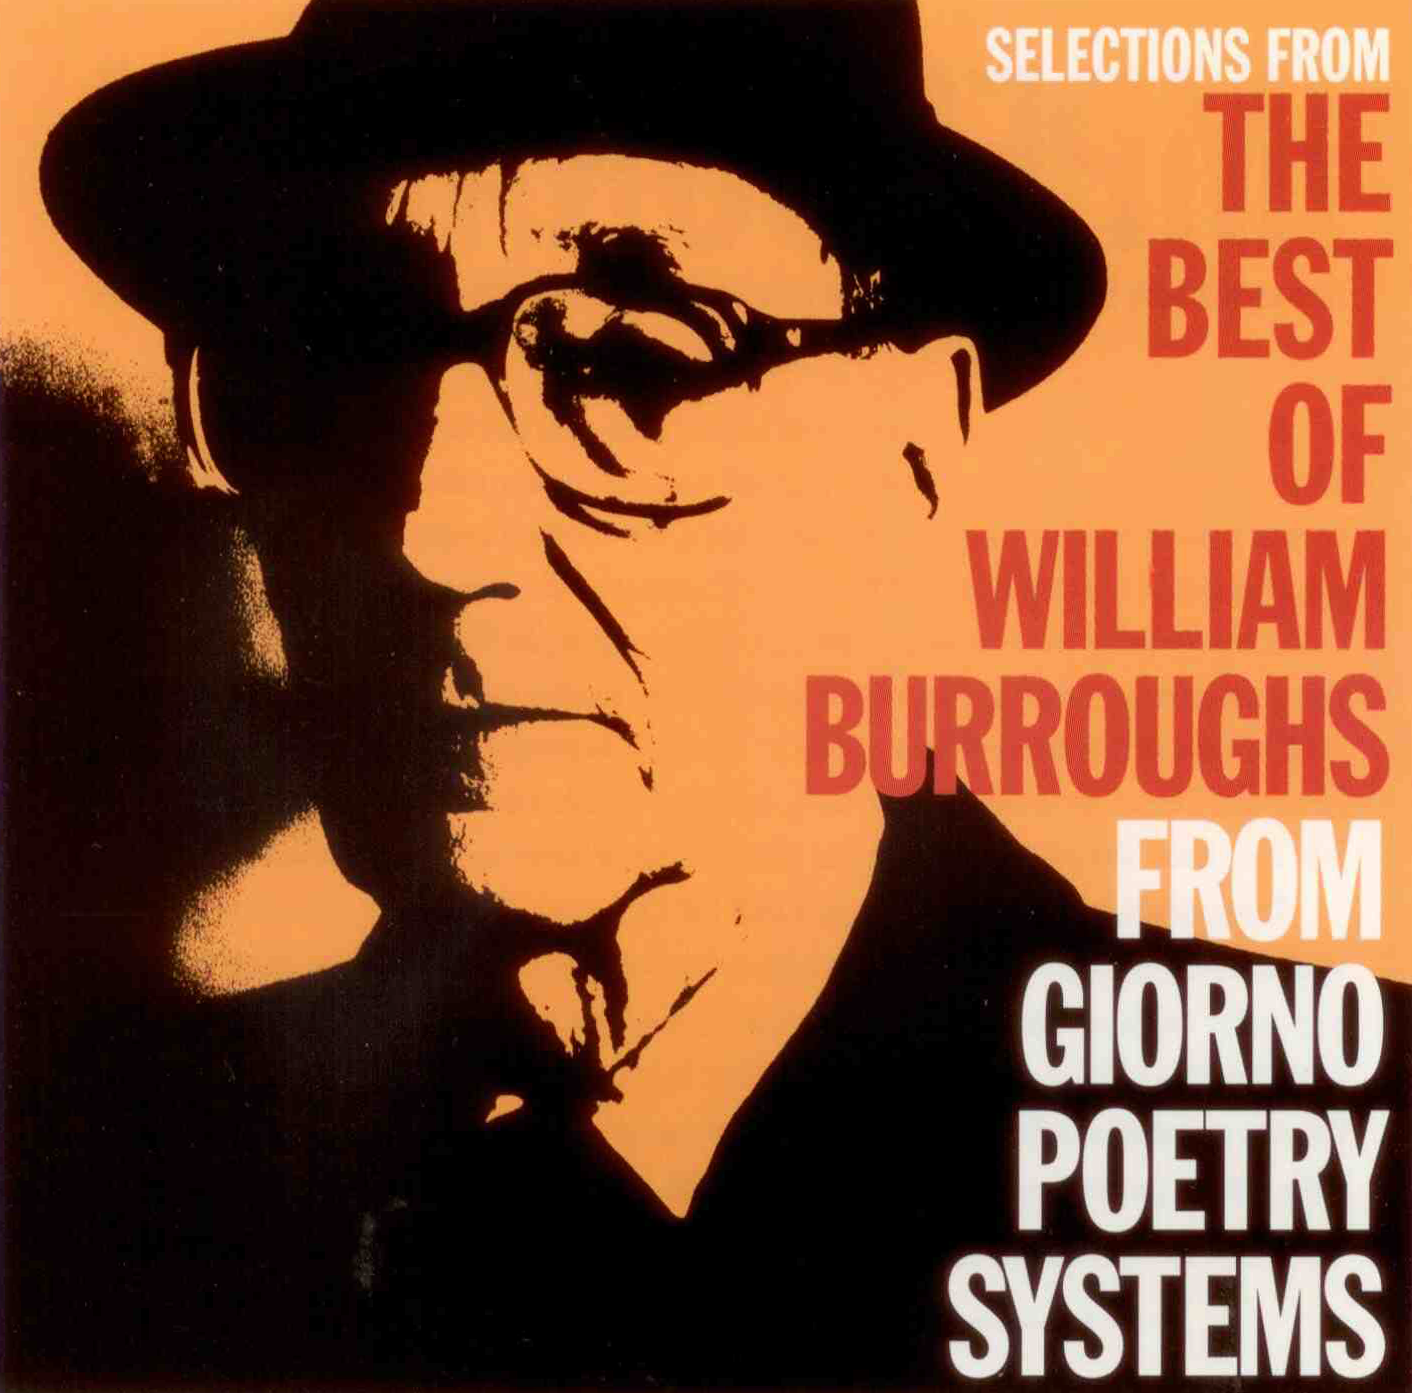 The Best of William Burroughs: From Giorno Poetry Systems - 1998